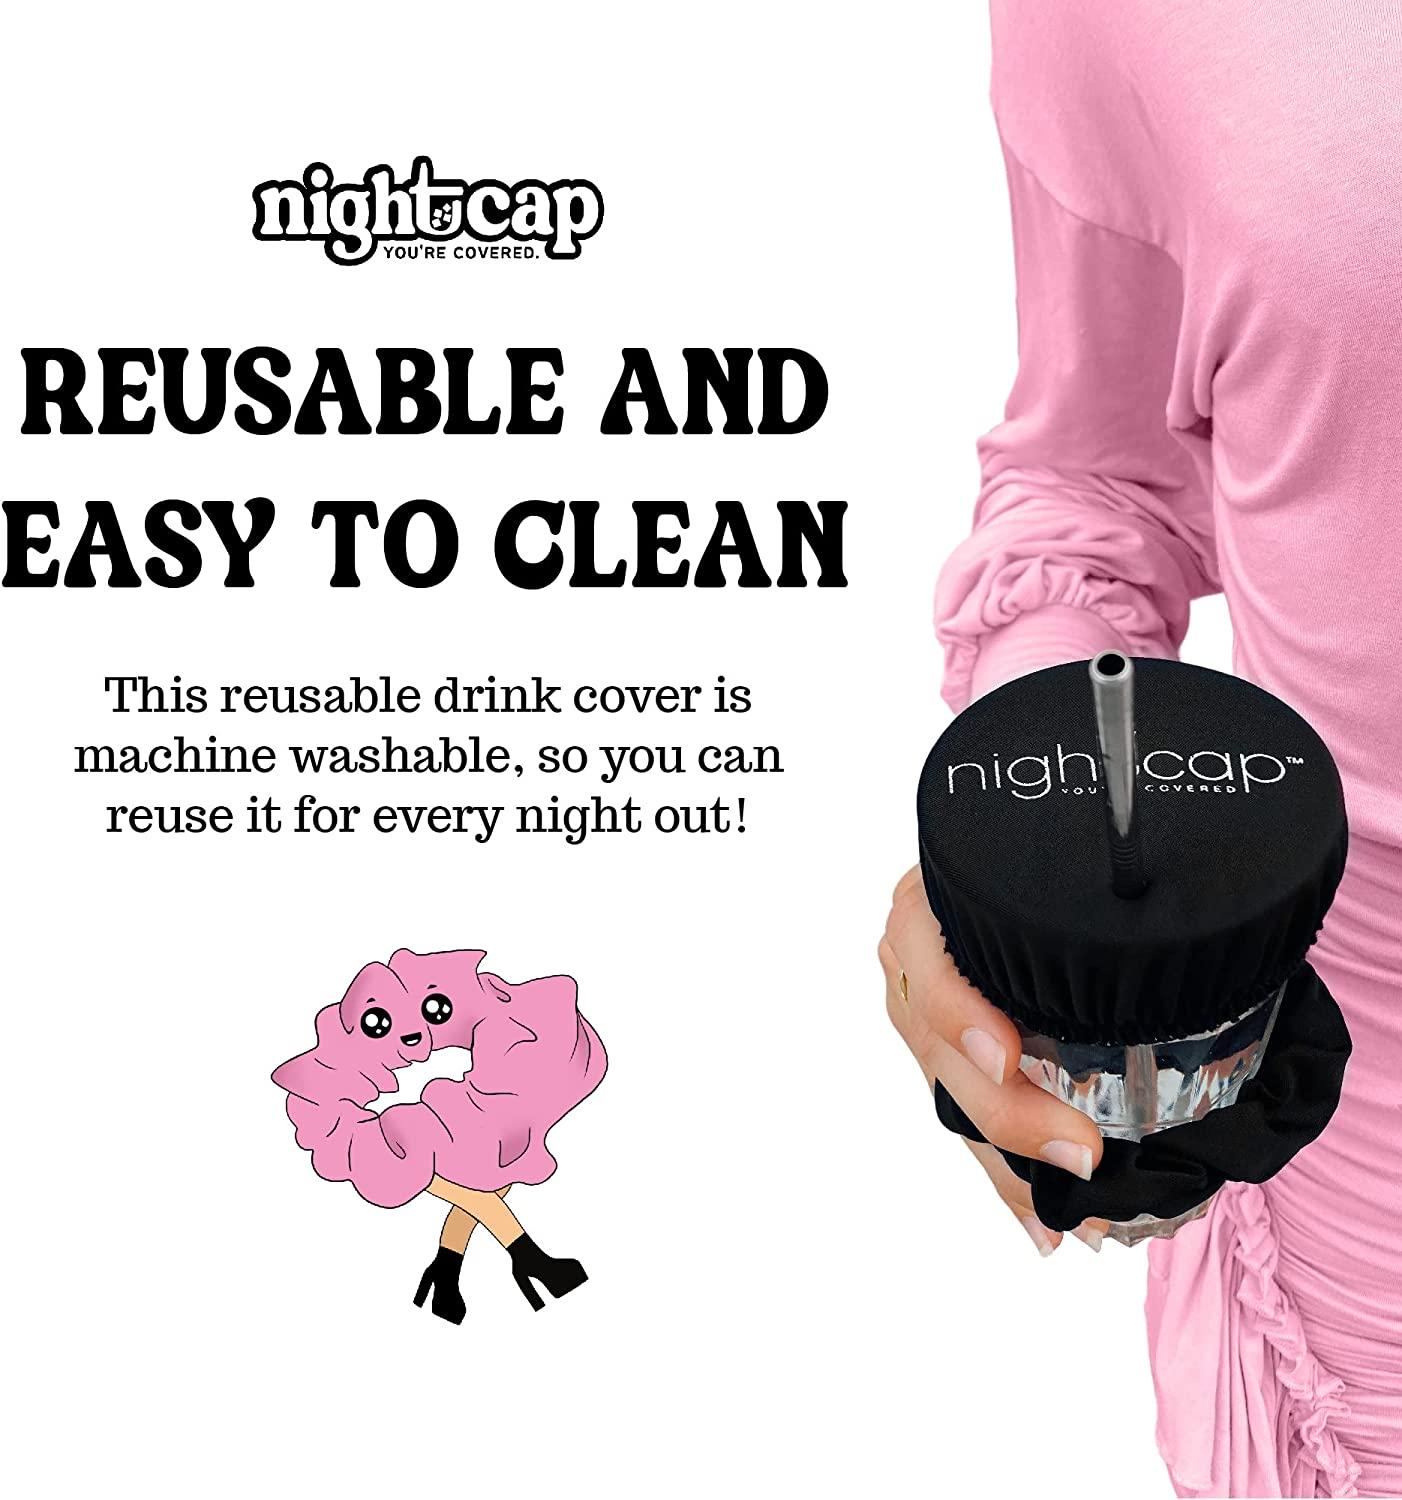 A nightcap #drinkcover is a #great way to #protect your #drinks! Code